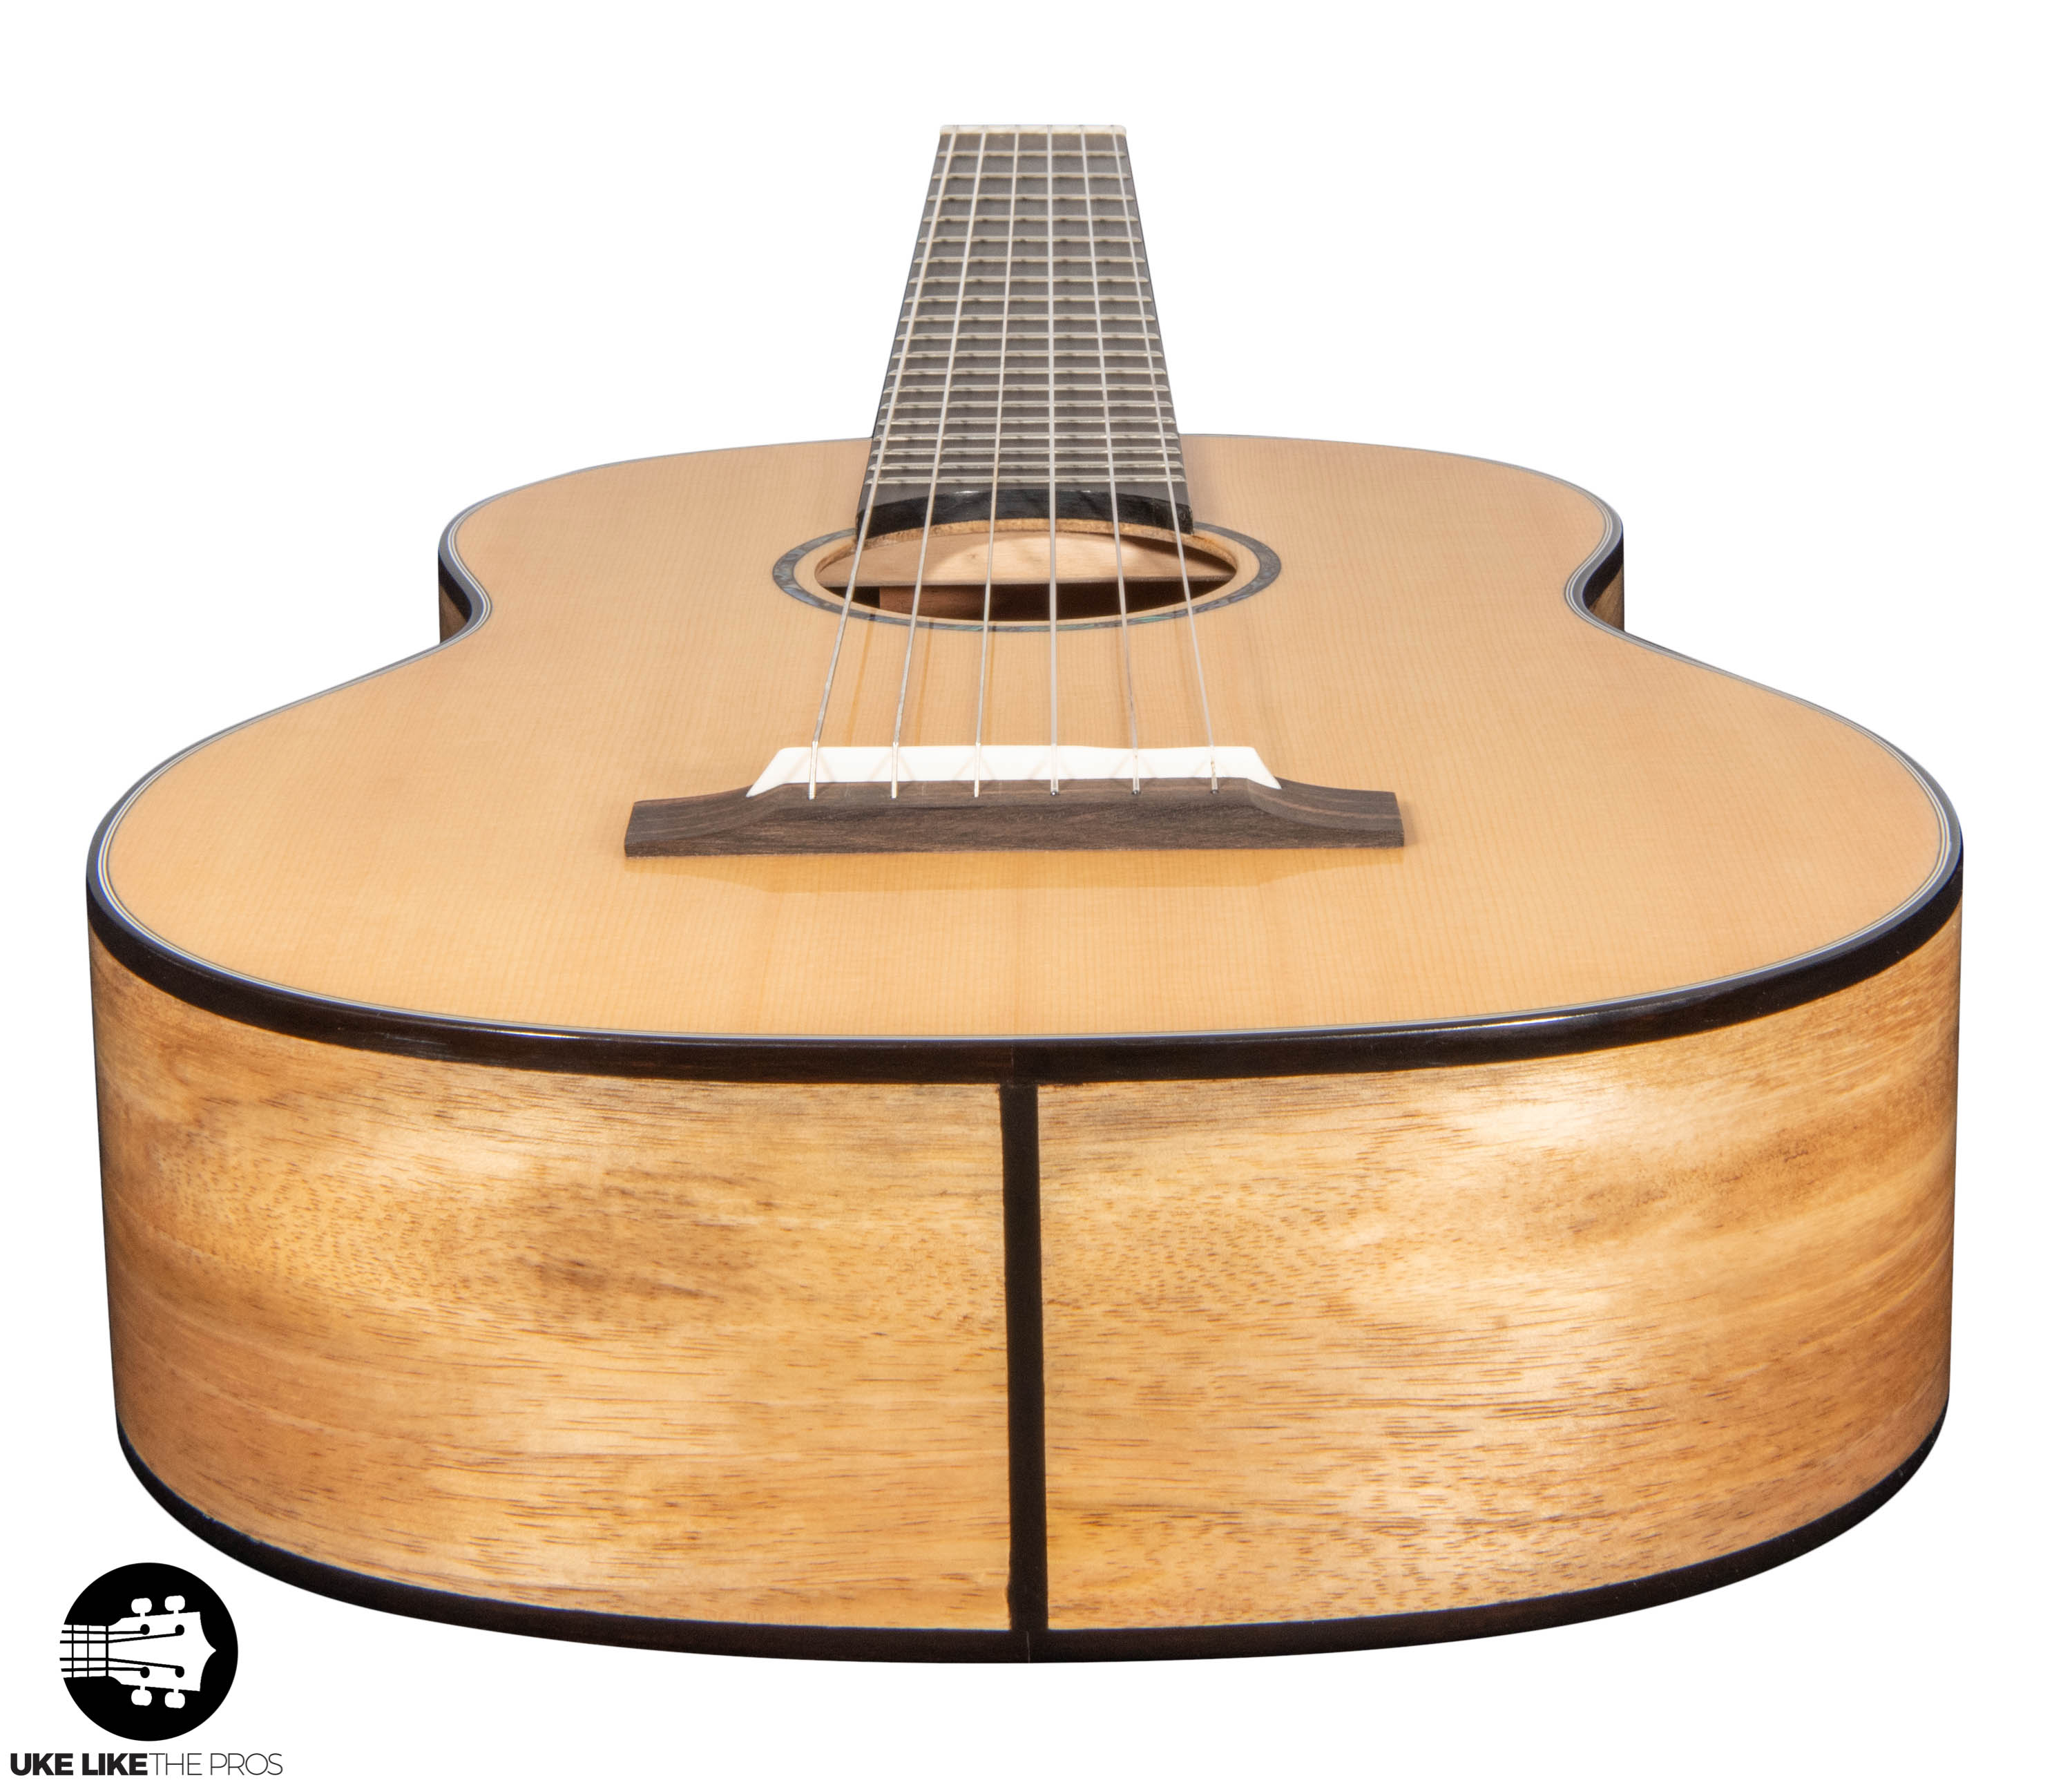 Romero Creations RC-PG-SMG Parlor Guitar Spruce and Spalted Mango "Ketterlay" Tuned E to E